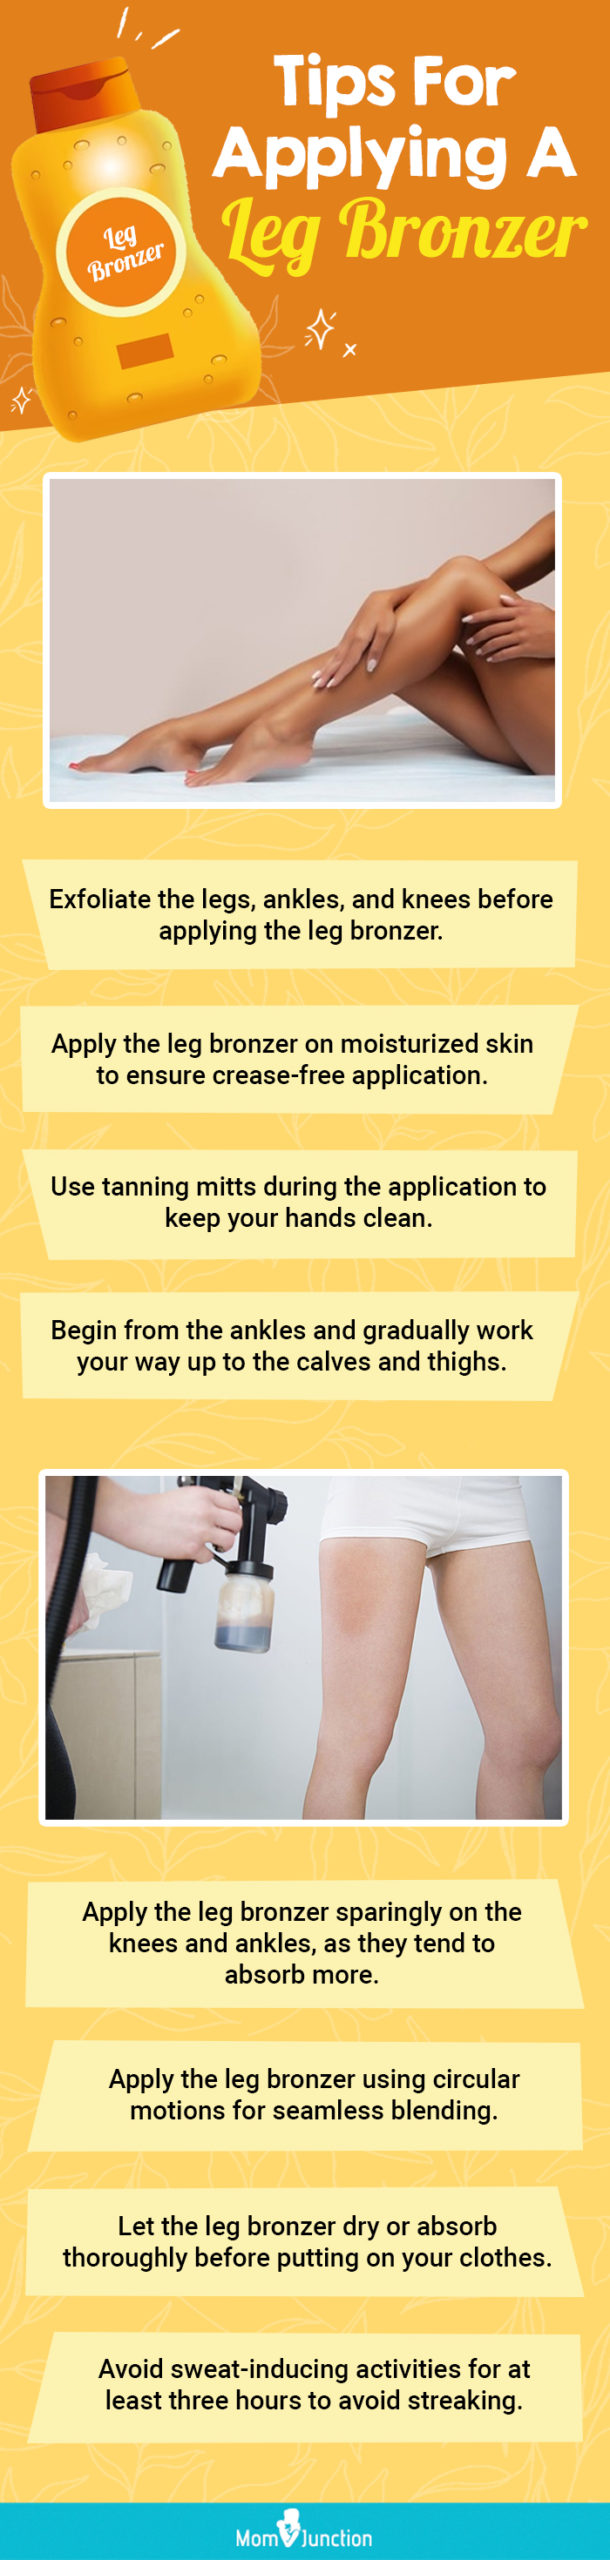 Tips For Applying A Leg Bronzer(infographic)